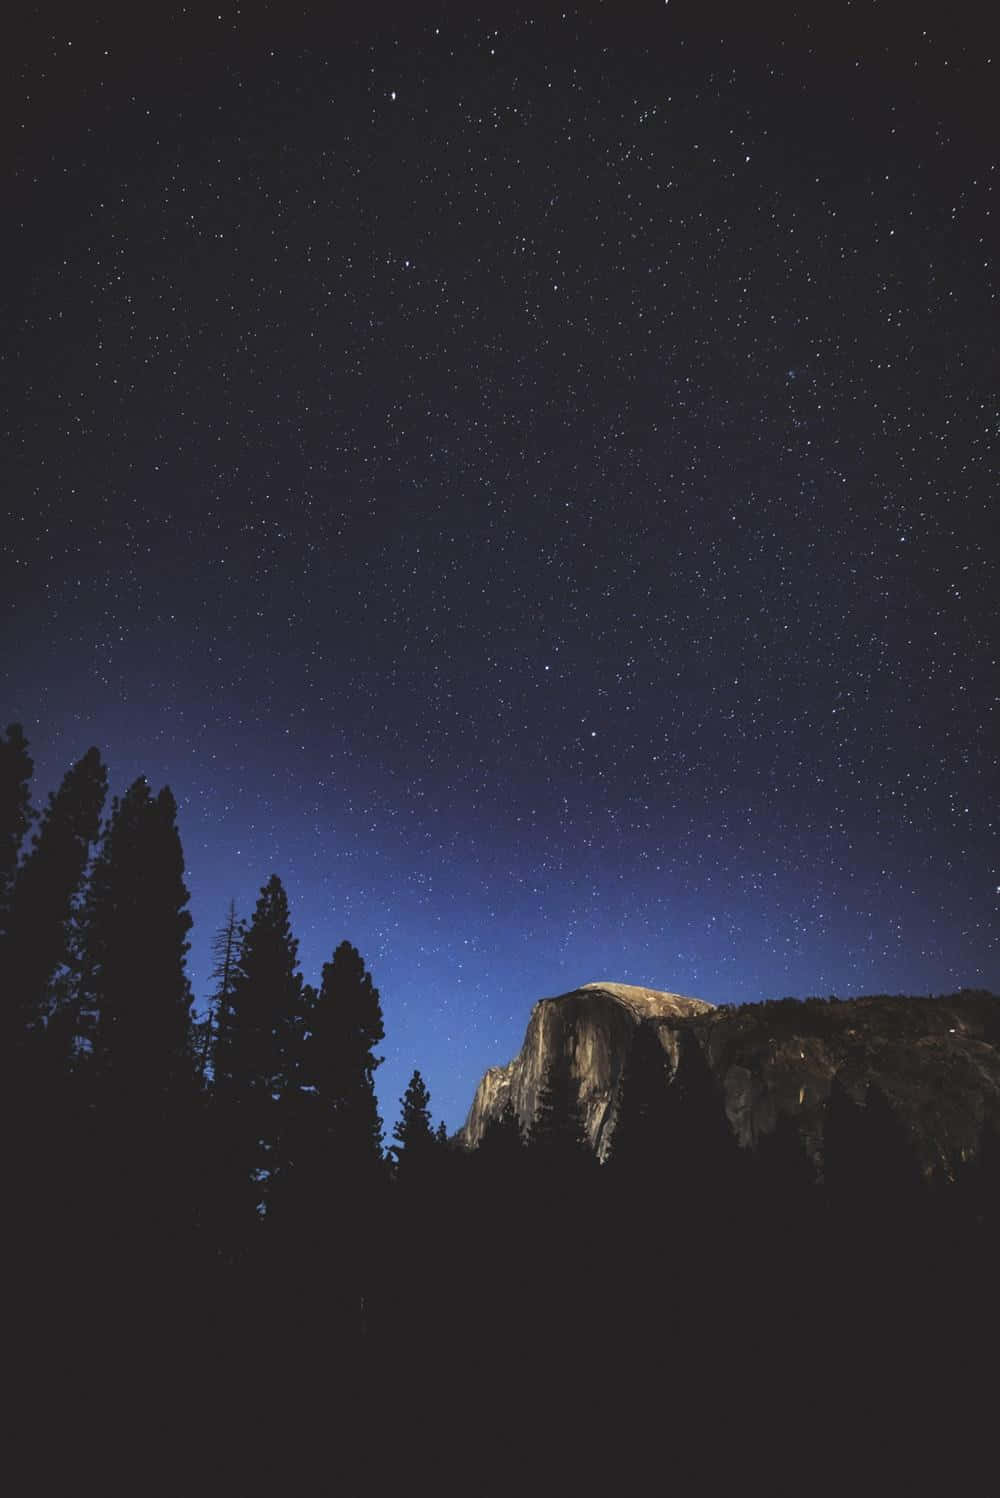 A Night Sky With Stars And Trees